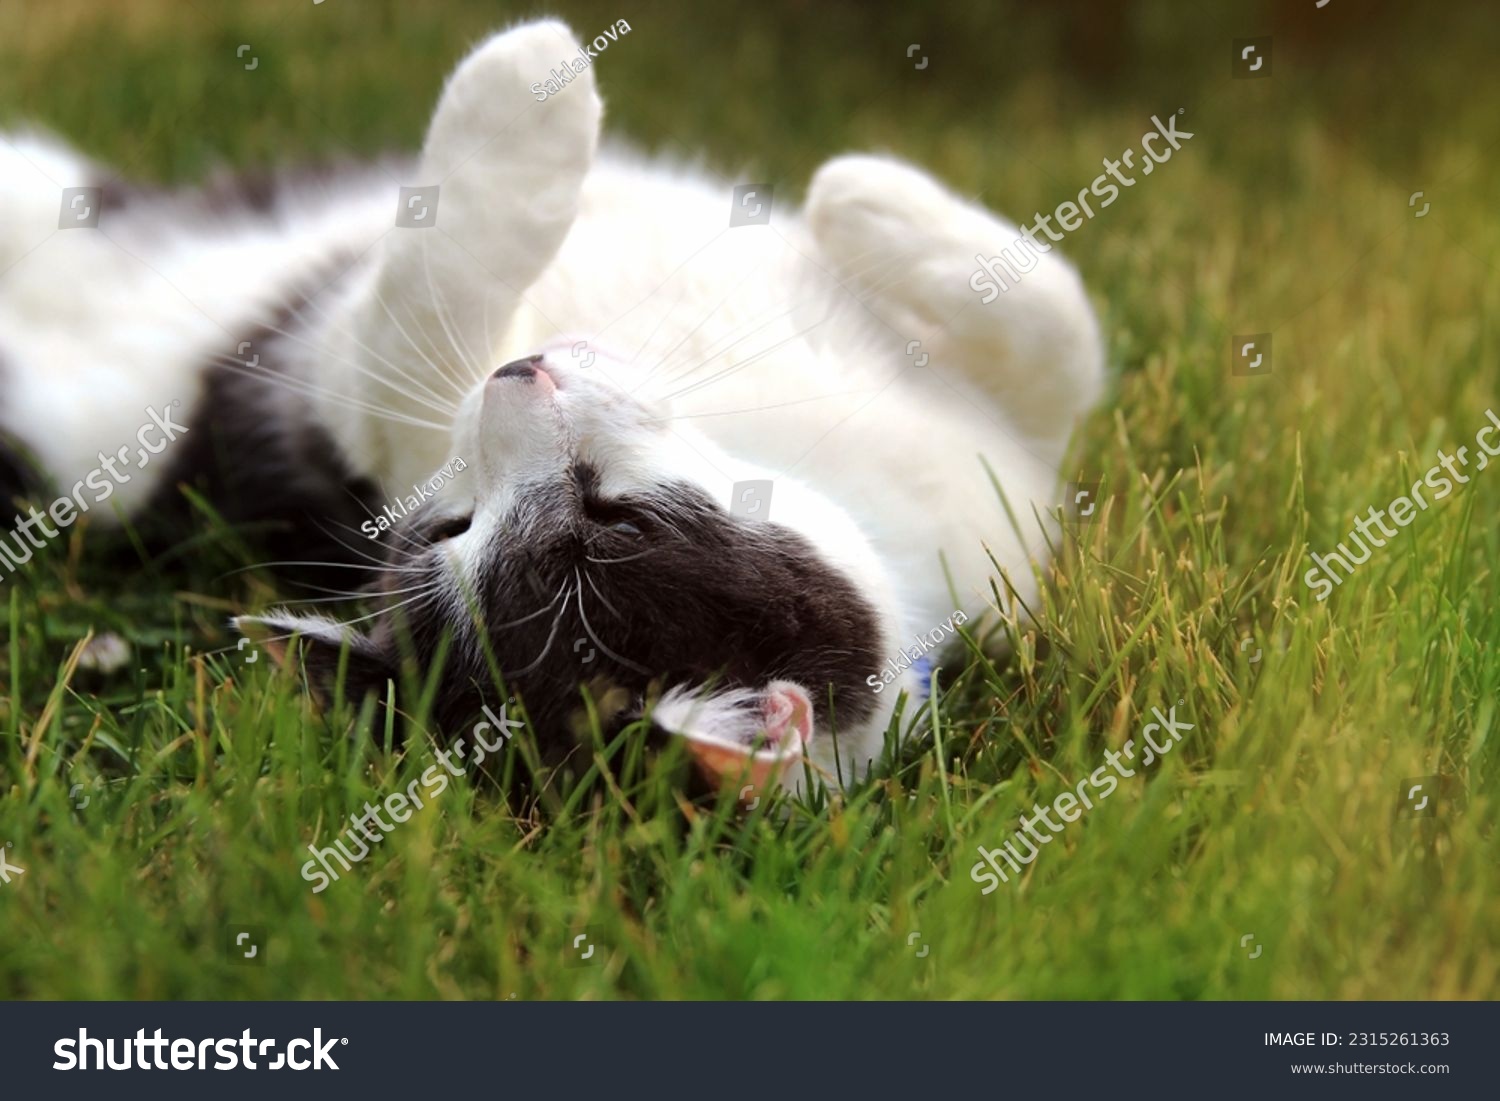 Cat laying on the grass outside in the backyard, garden. Cat is looking at the camera, resting. #2315261363